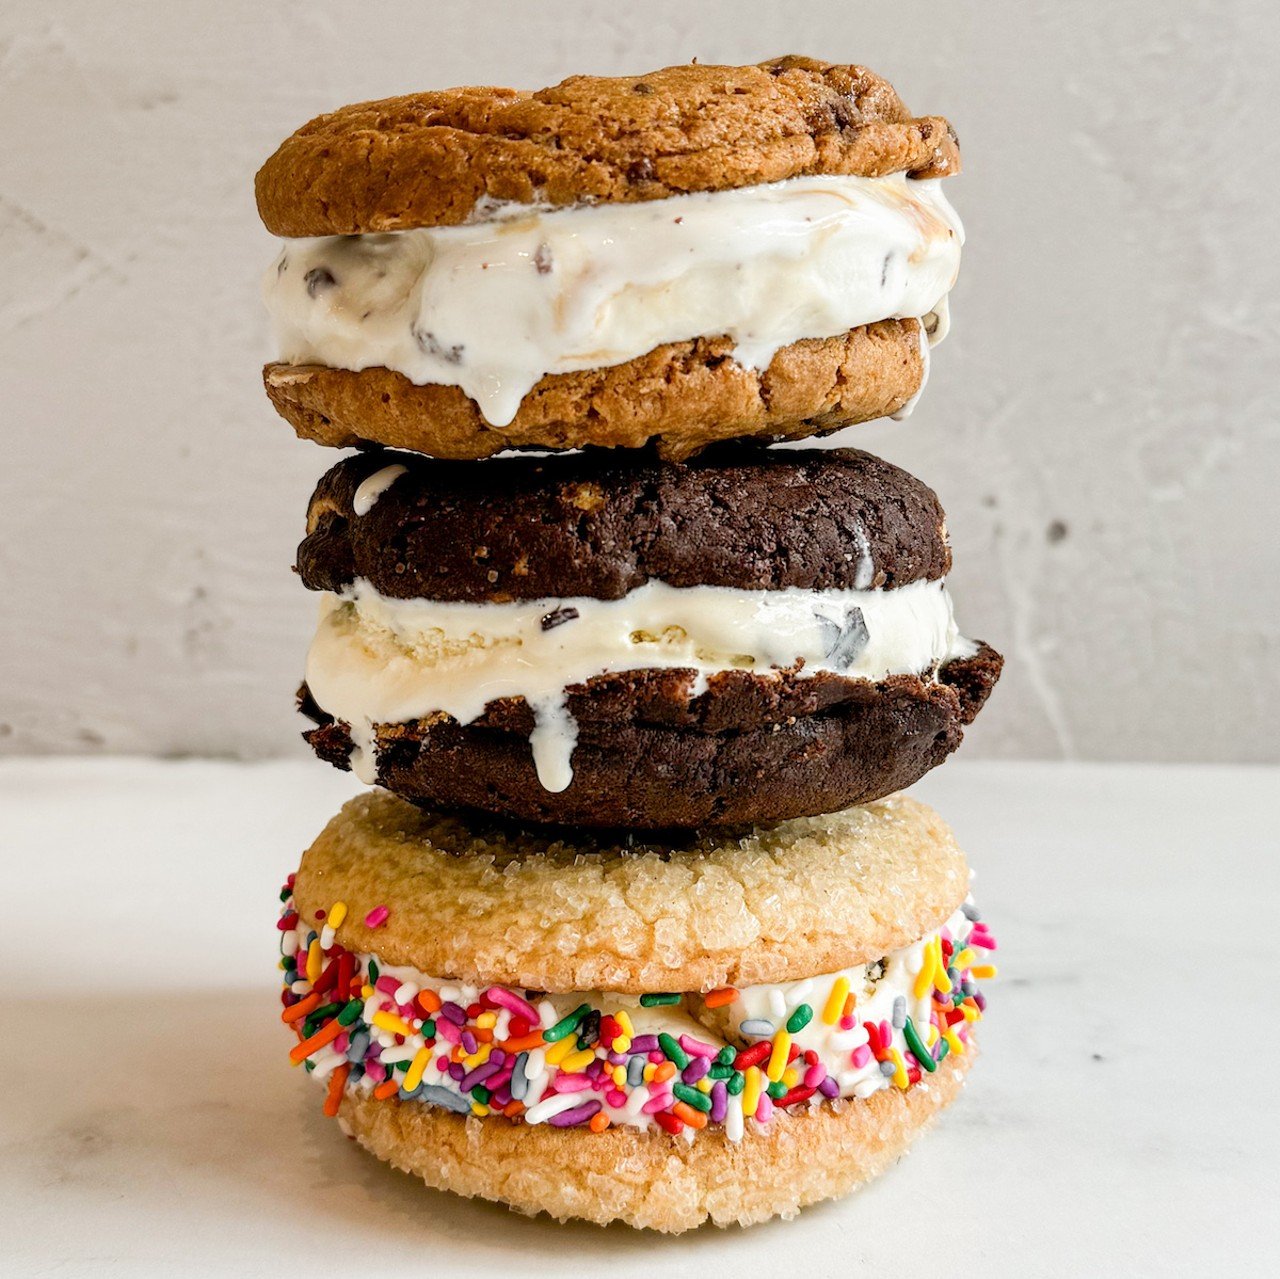 Très Belle Cakes
8921 Reading Road, Reading
Ice Cream Cookie Sandwich: A thick layer of ice cream sandwiched between two big homemade cookies. Availabile in your choice of one of three flavors: Toffee Chip Cookie with Toffee Caramel Ice Cream, Triple Chocolate Cookie with Chocolate Chip Ice Cream or the Signature Sparkle Sugar Cookie with Vanilla Bean Ice Cream and sprinkles.